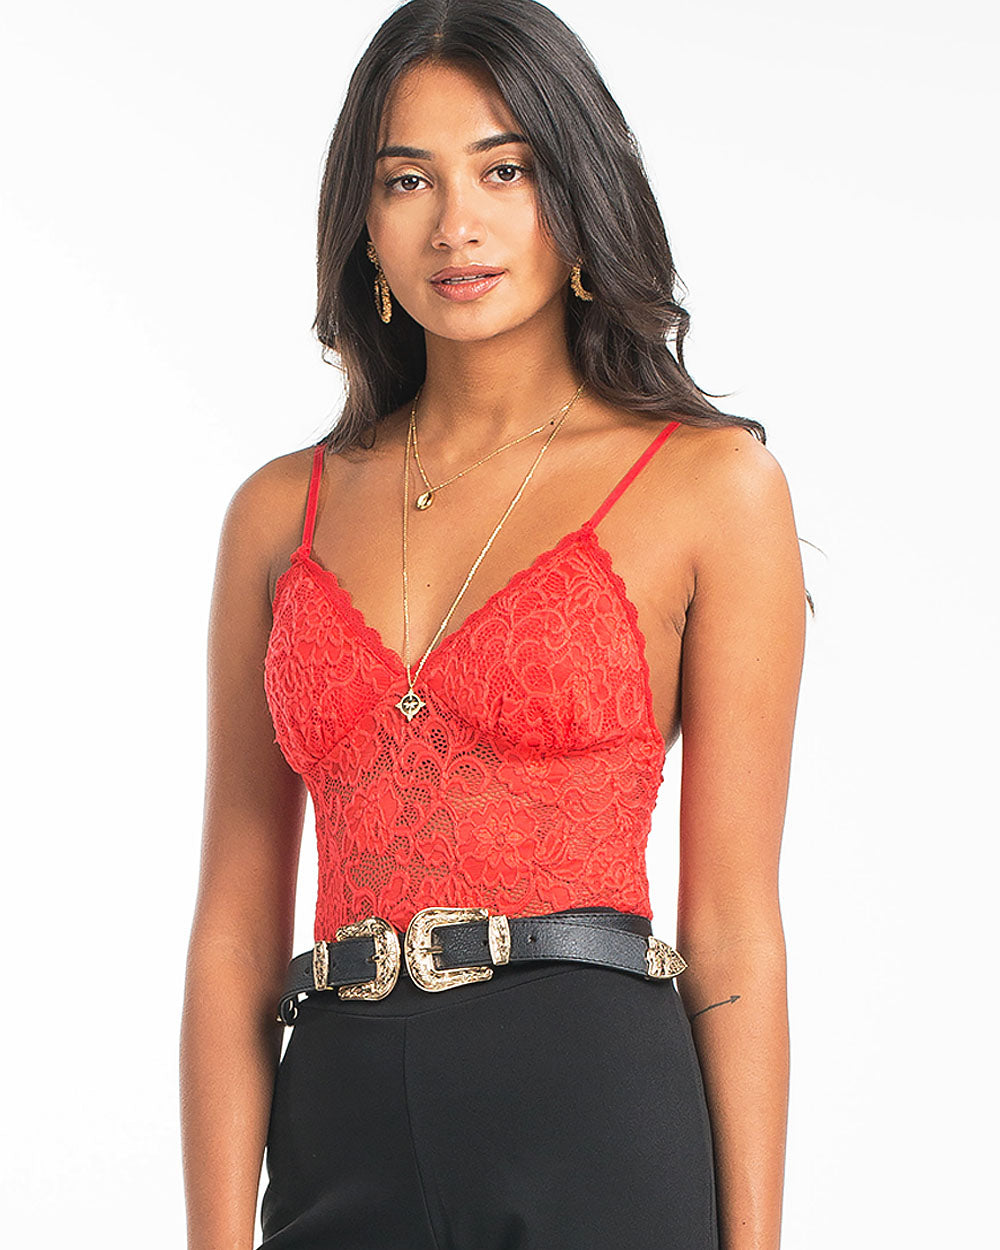 Seduction Lace Body - Red